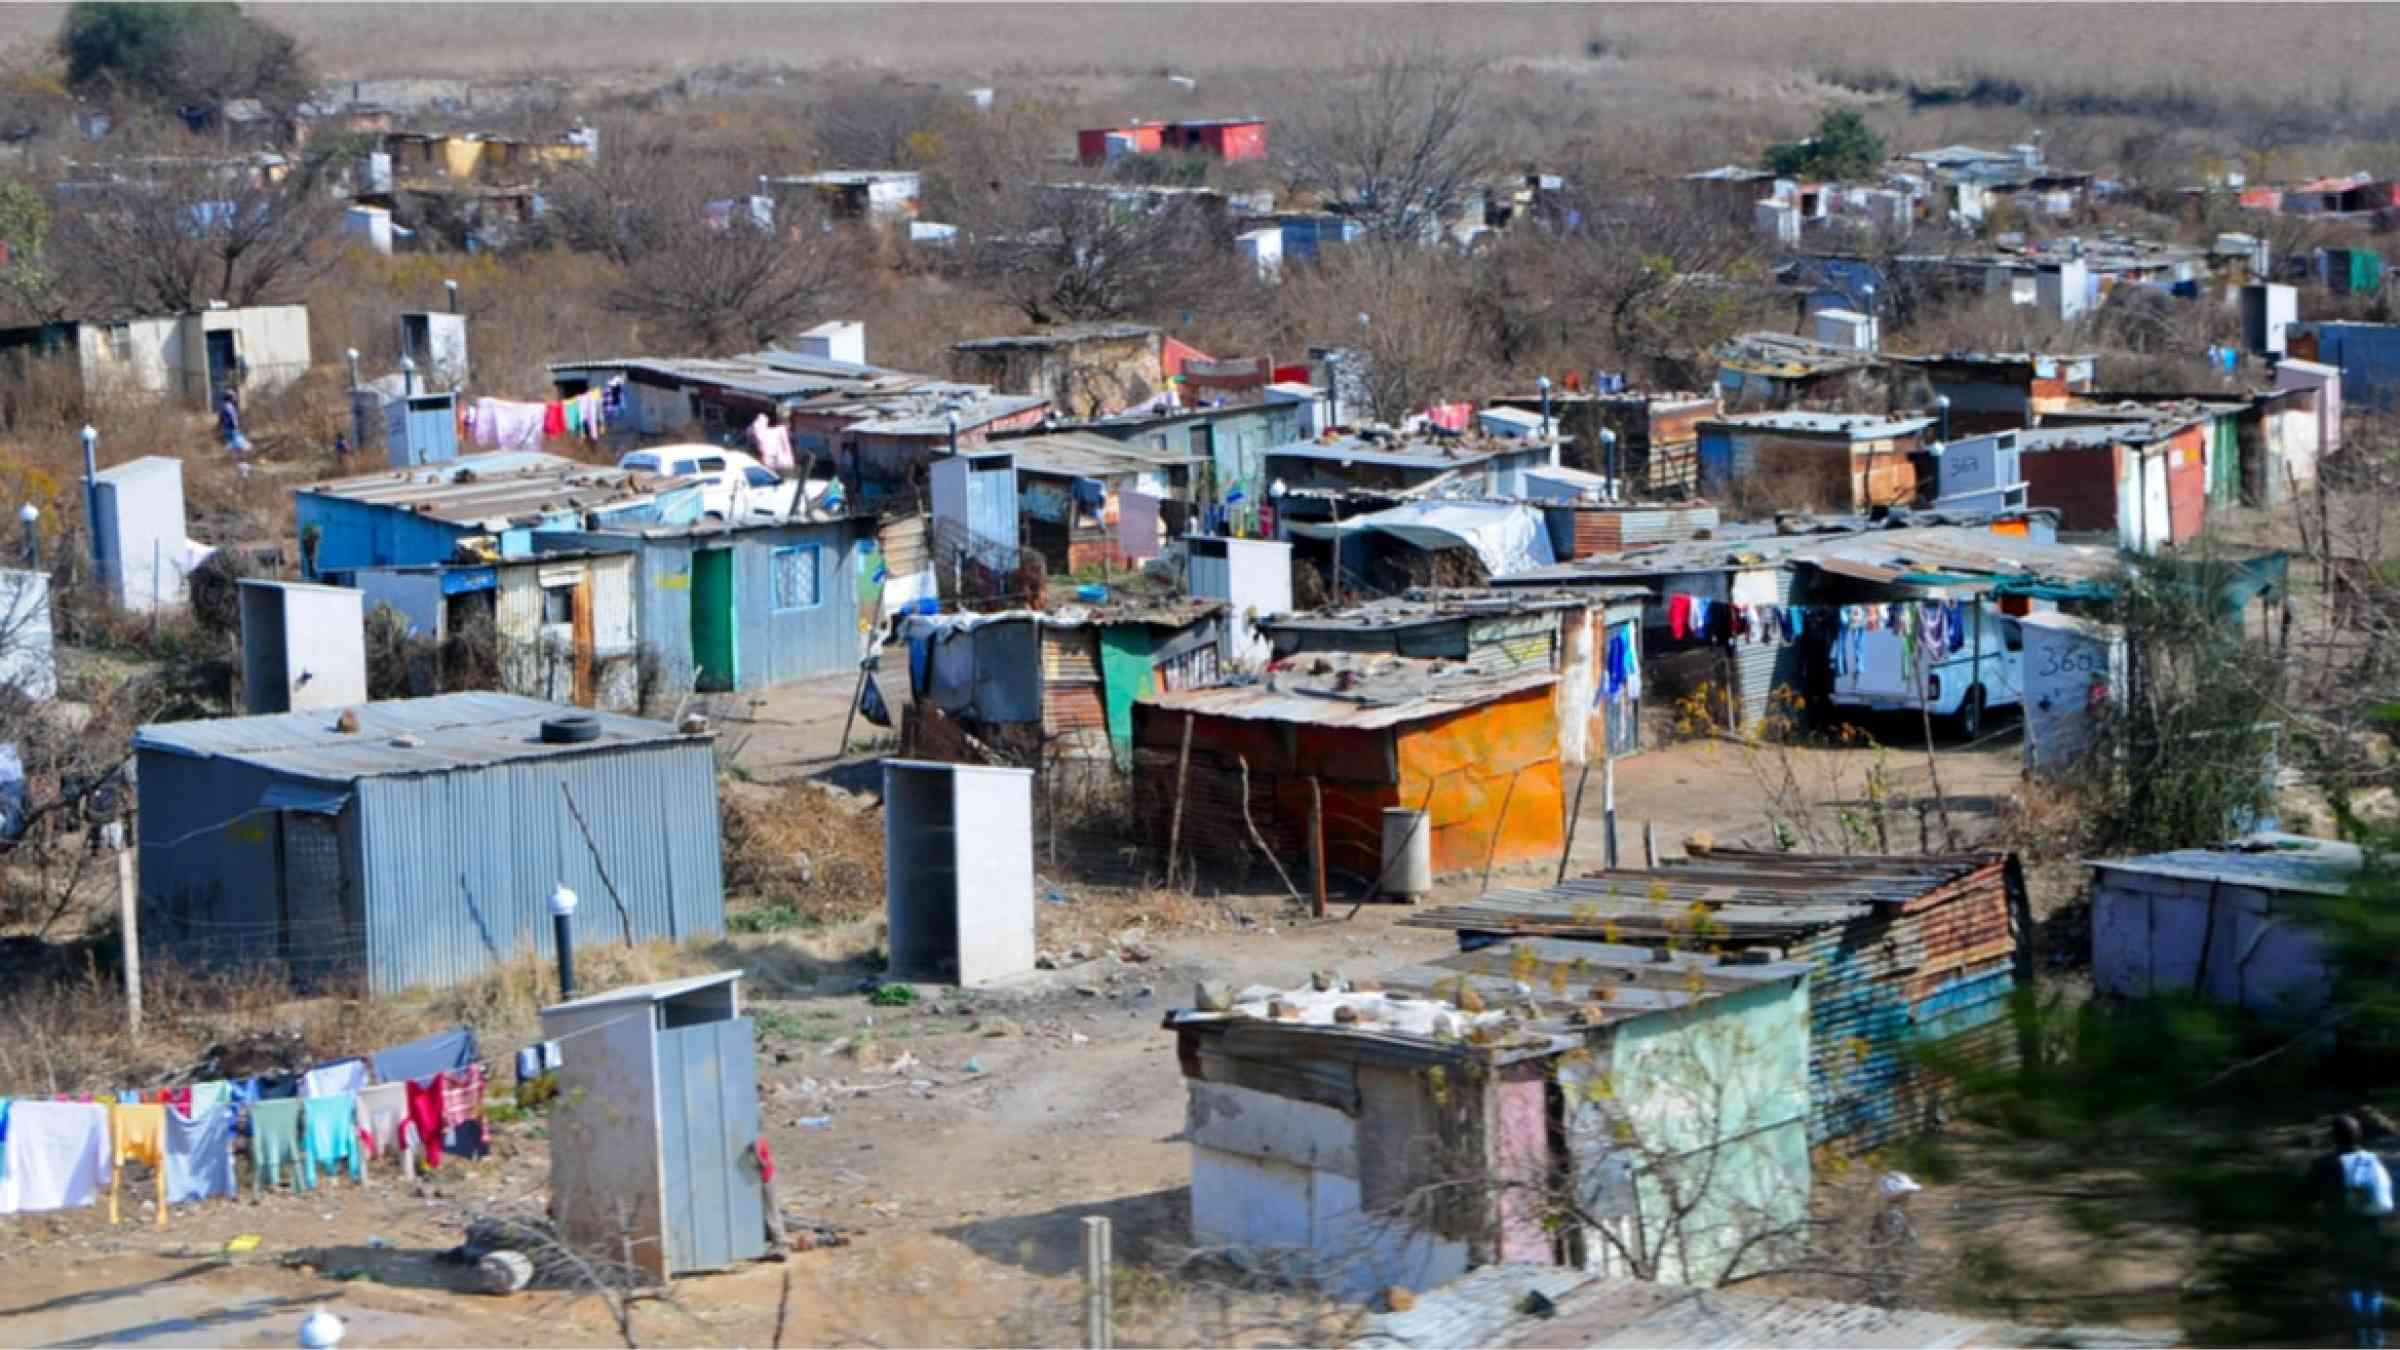 Township in South Africa. Soweto in Johannesburg.